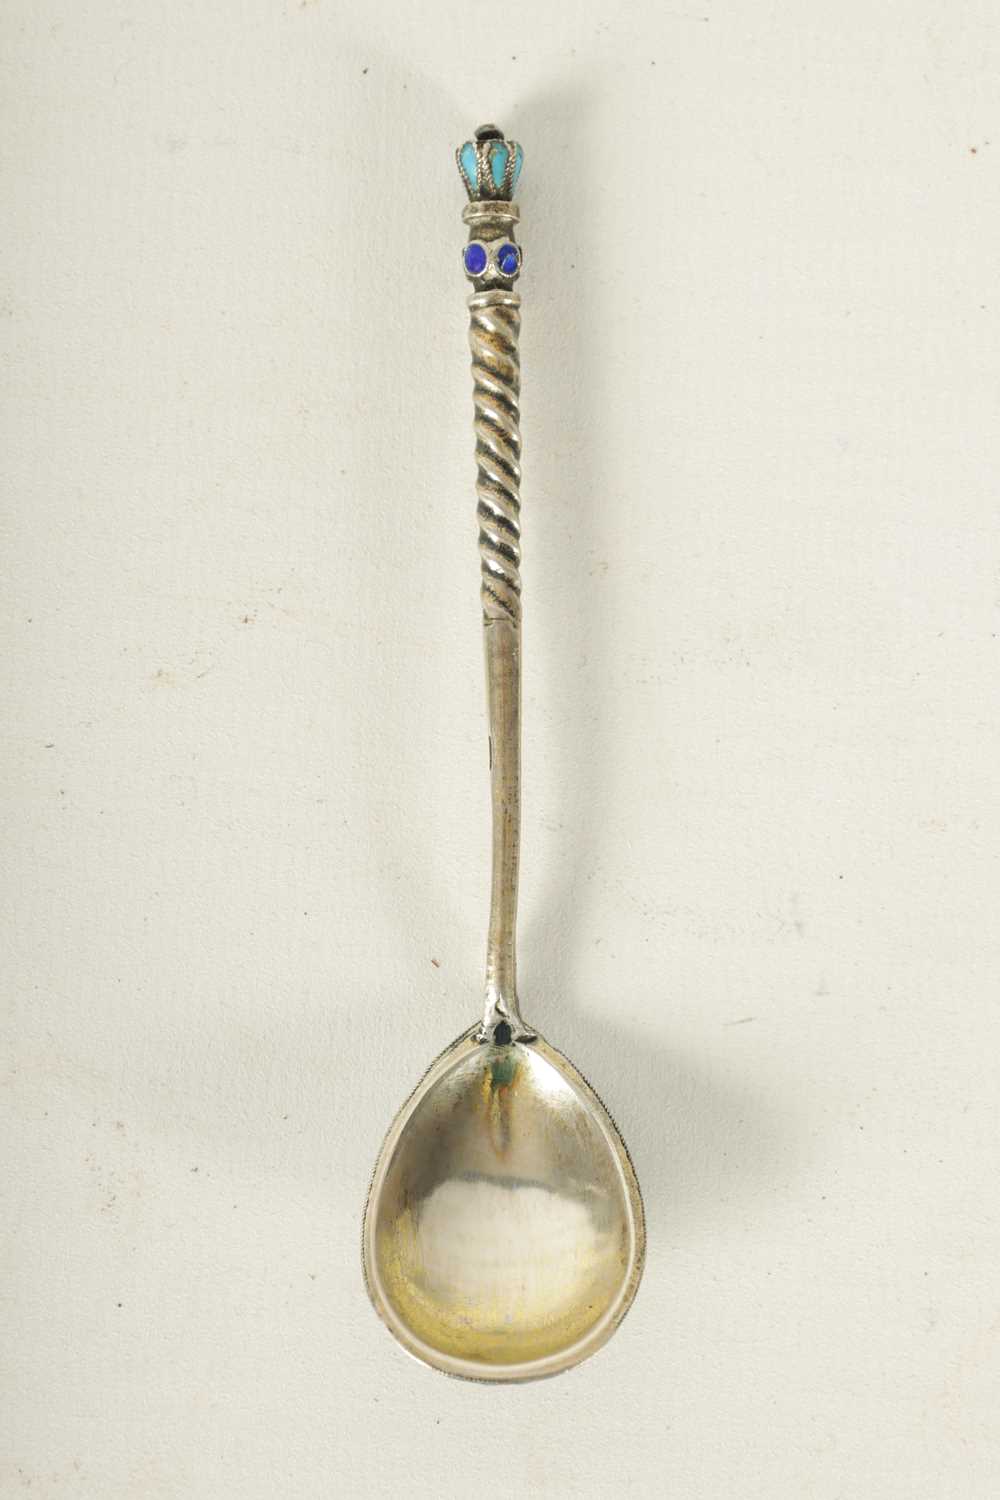 AN EARLY 20TH CENTURY RUSSIAN SILVER GILT AND CLOISONNE ENAMEL SPOON - Image 2 of 6